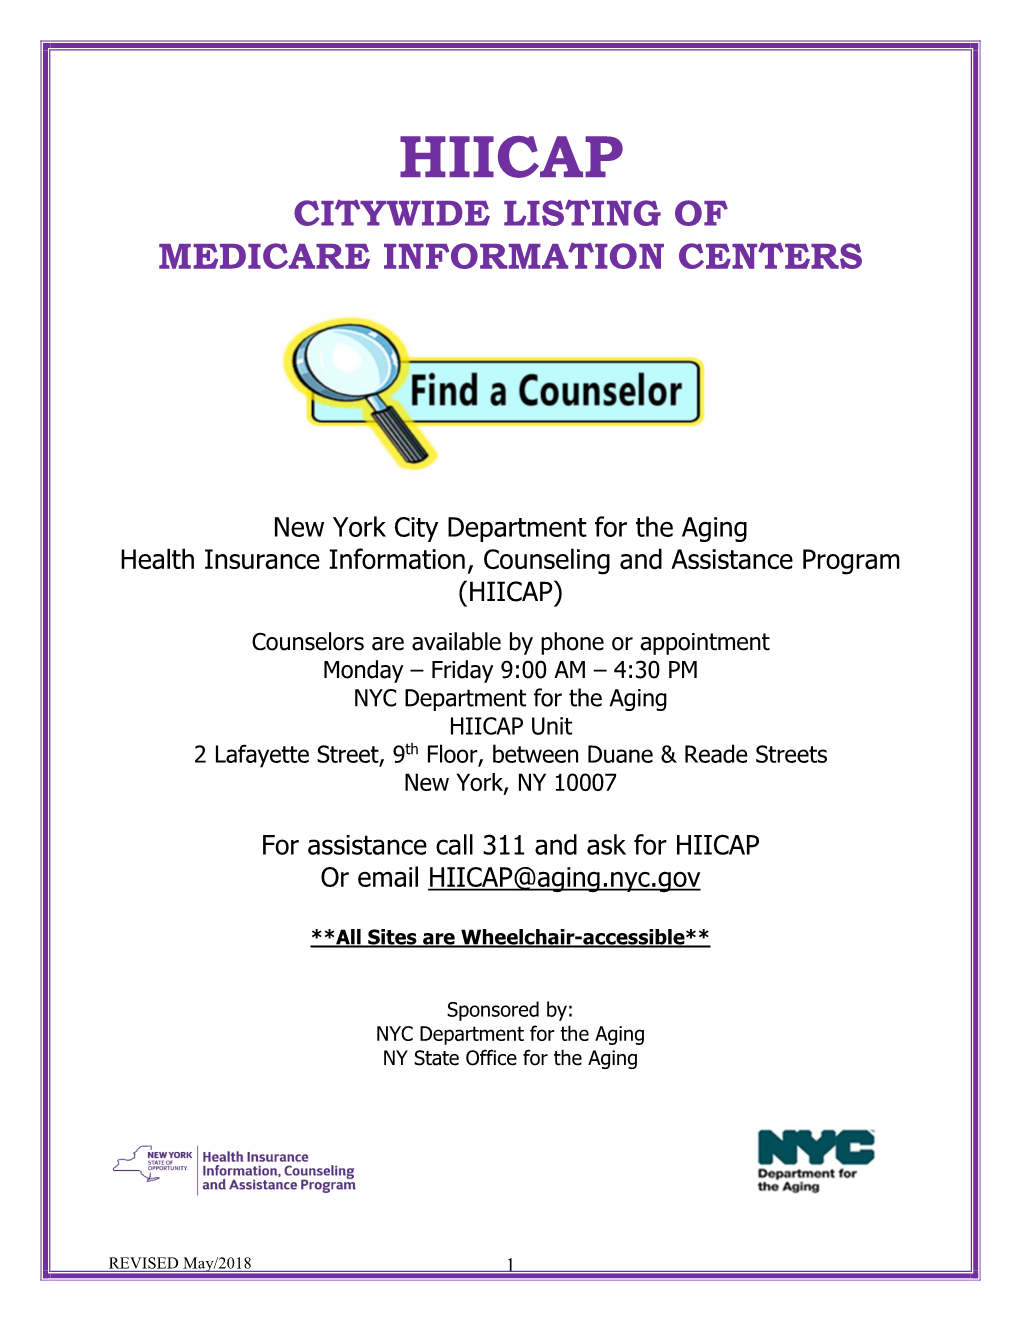 Hiicap Citywide Listing of Medicare Information Centers